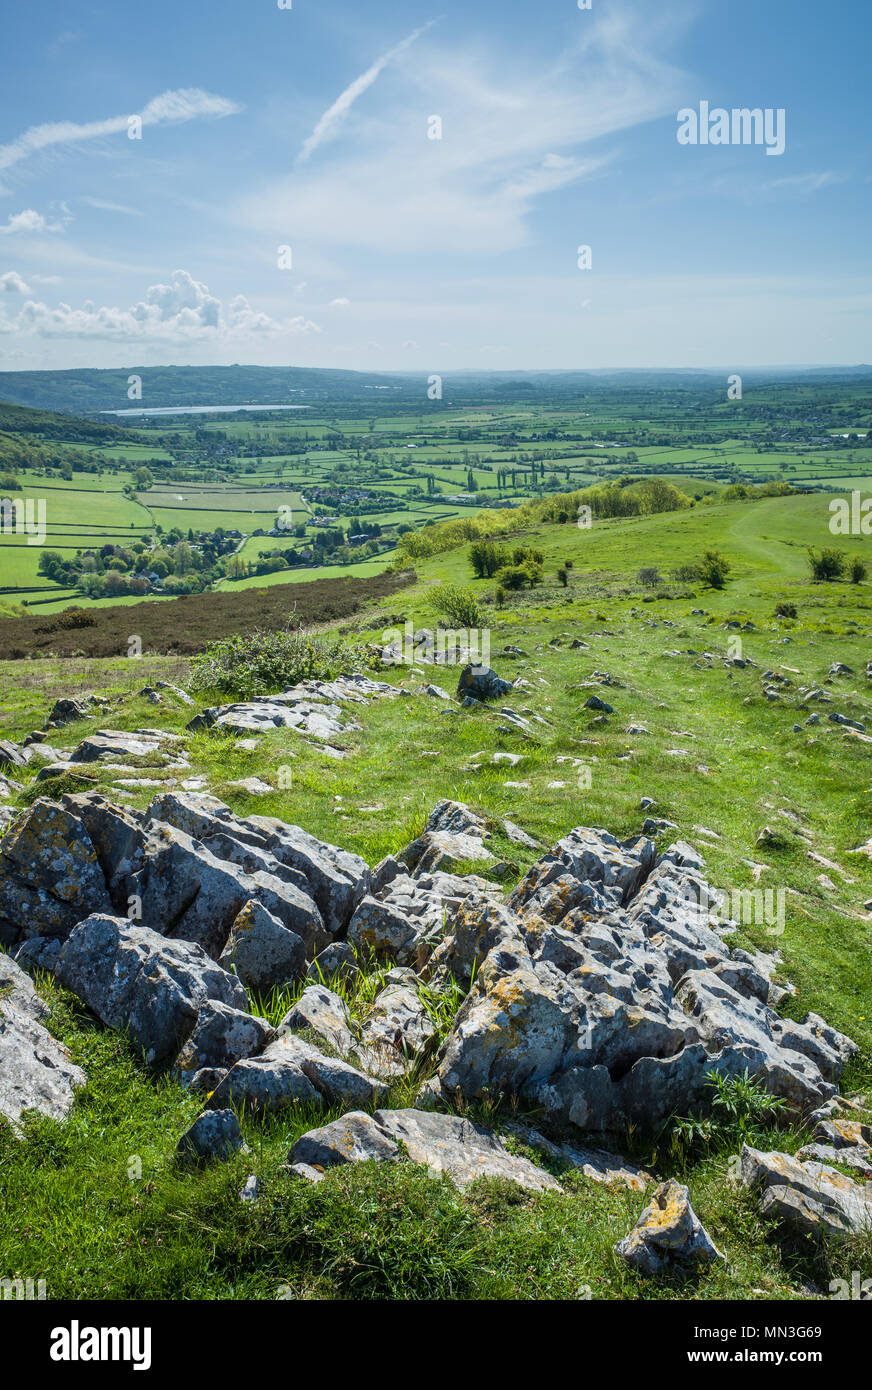 A vibrant and colourful image of the beautiful view from Crook Peak towards Cheddar and Glastonbury in The Mendip Hills, Somerset, UK. Stock Photo